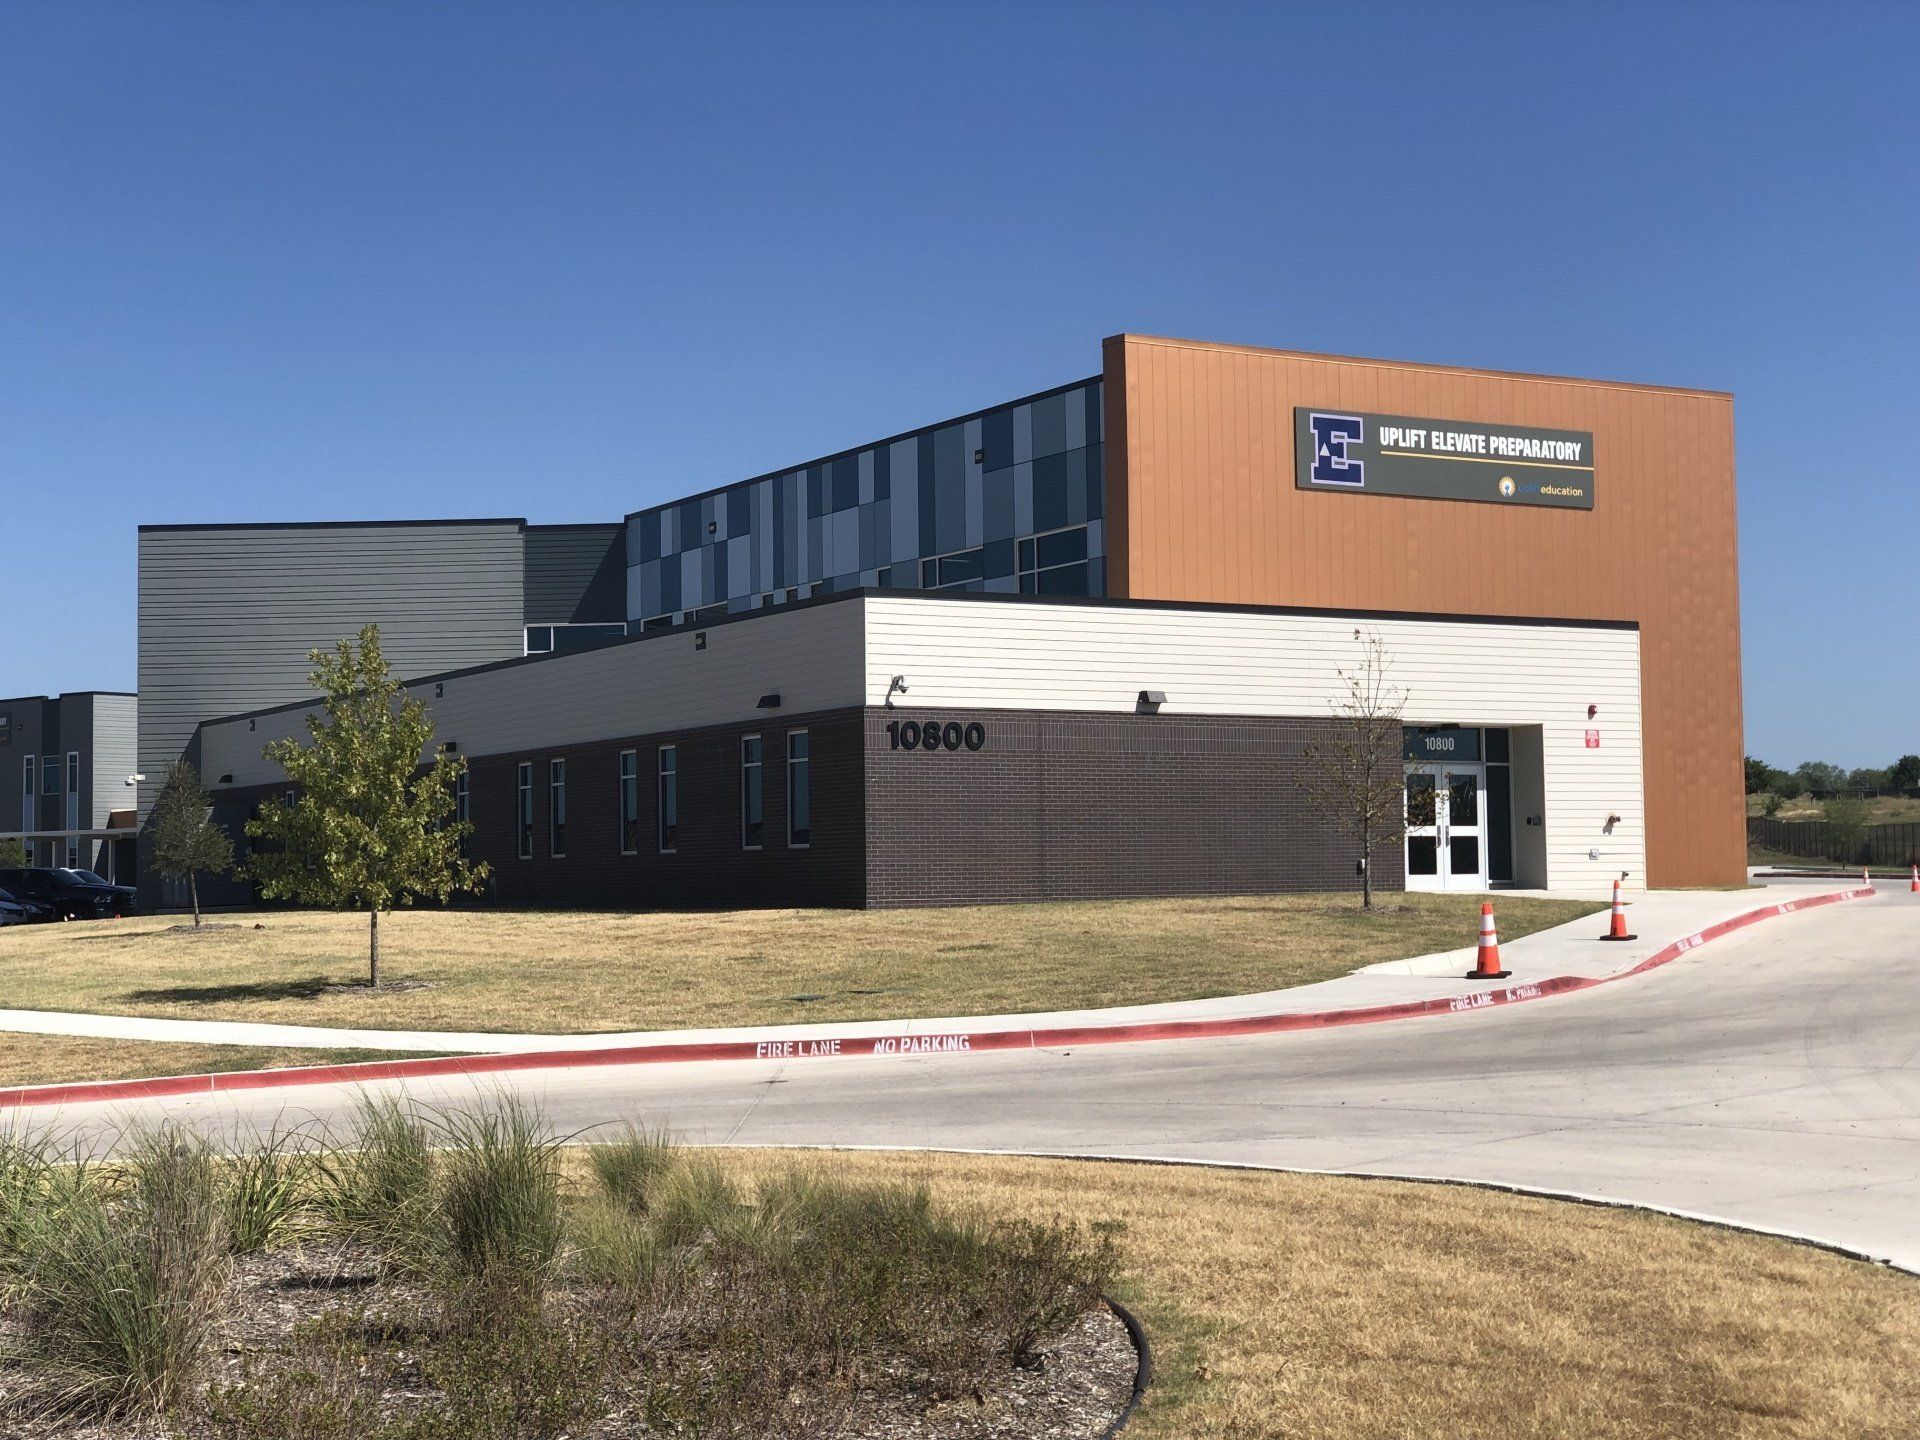 Commercial siding on a school in Texas by Preview Construction.